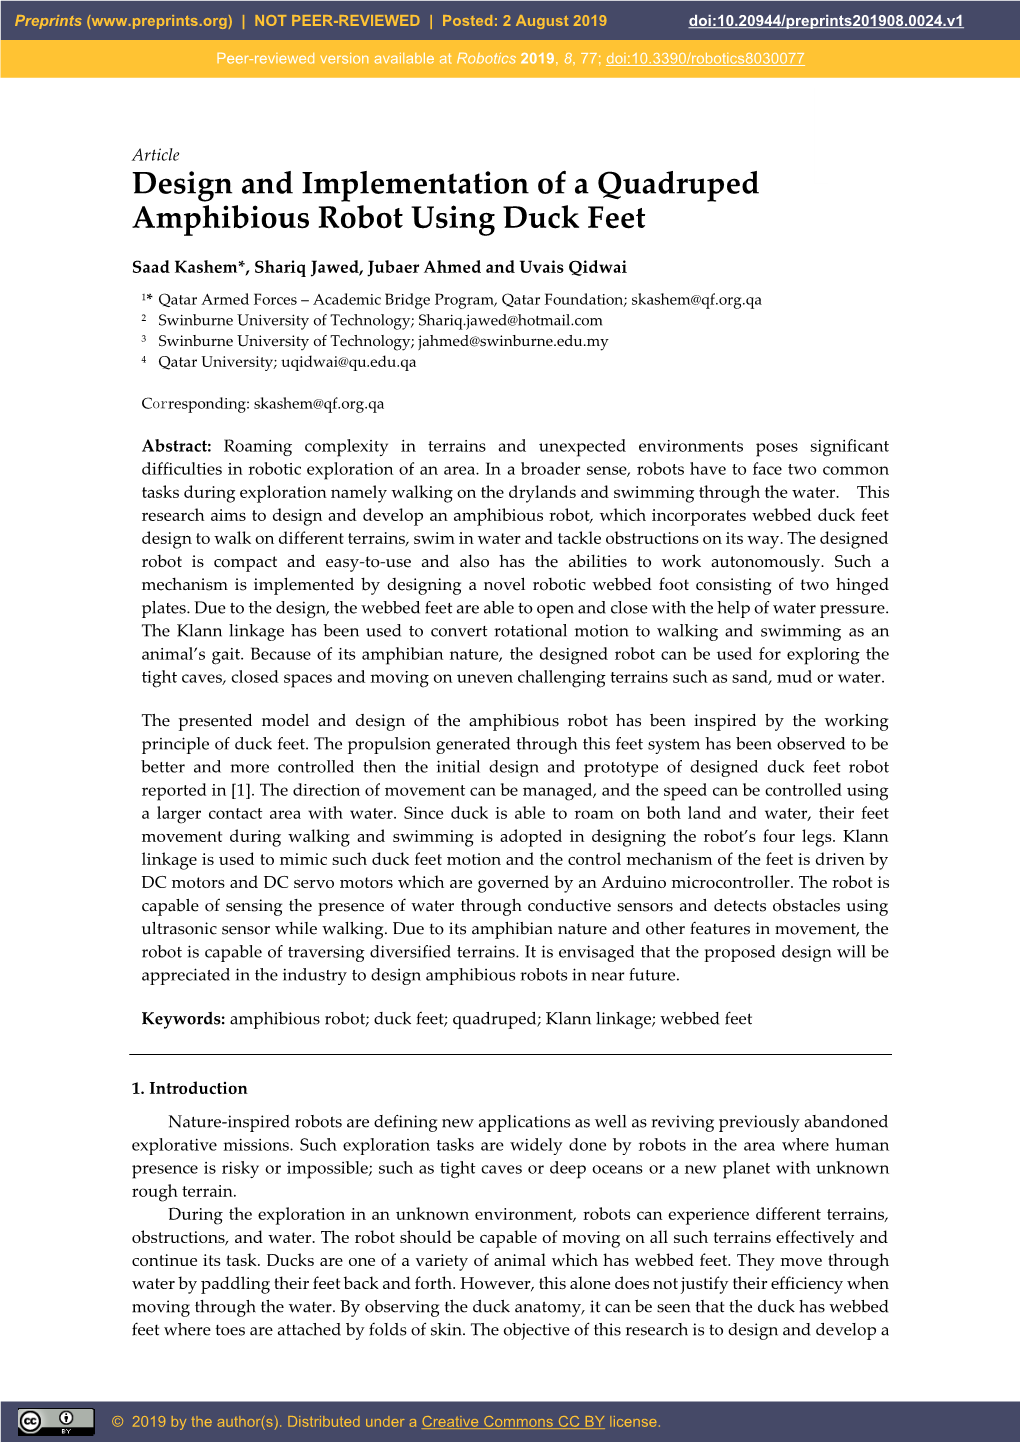 Article Design and Implementation of a Quadruped Amphibious Robot Using Duck Feet